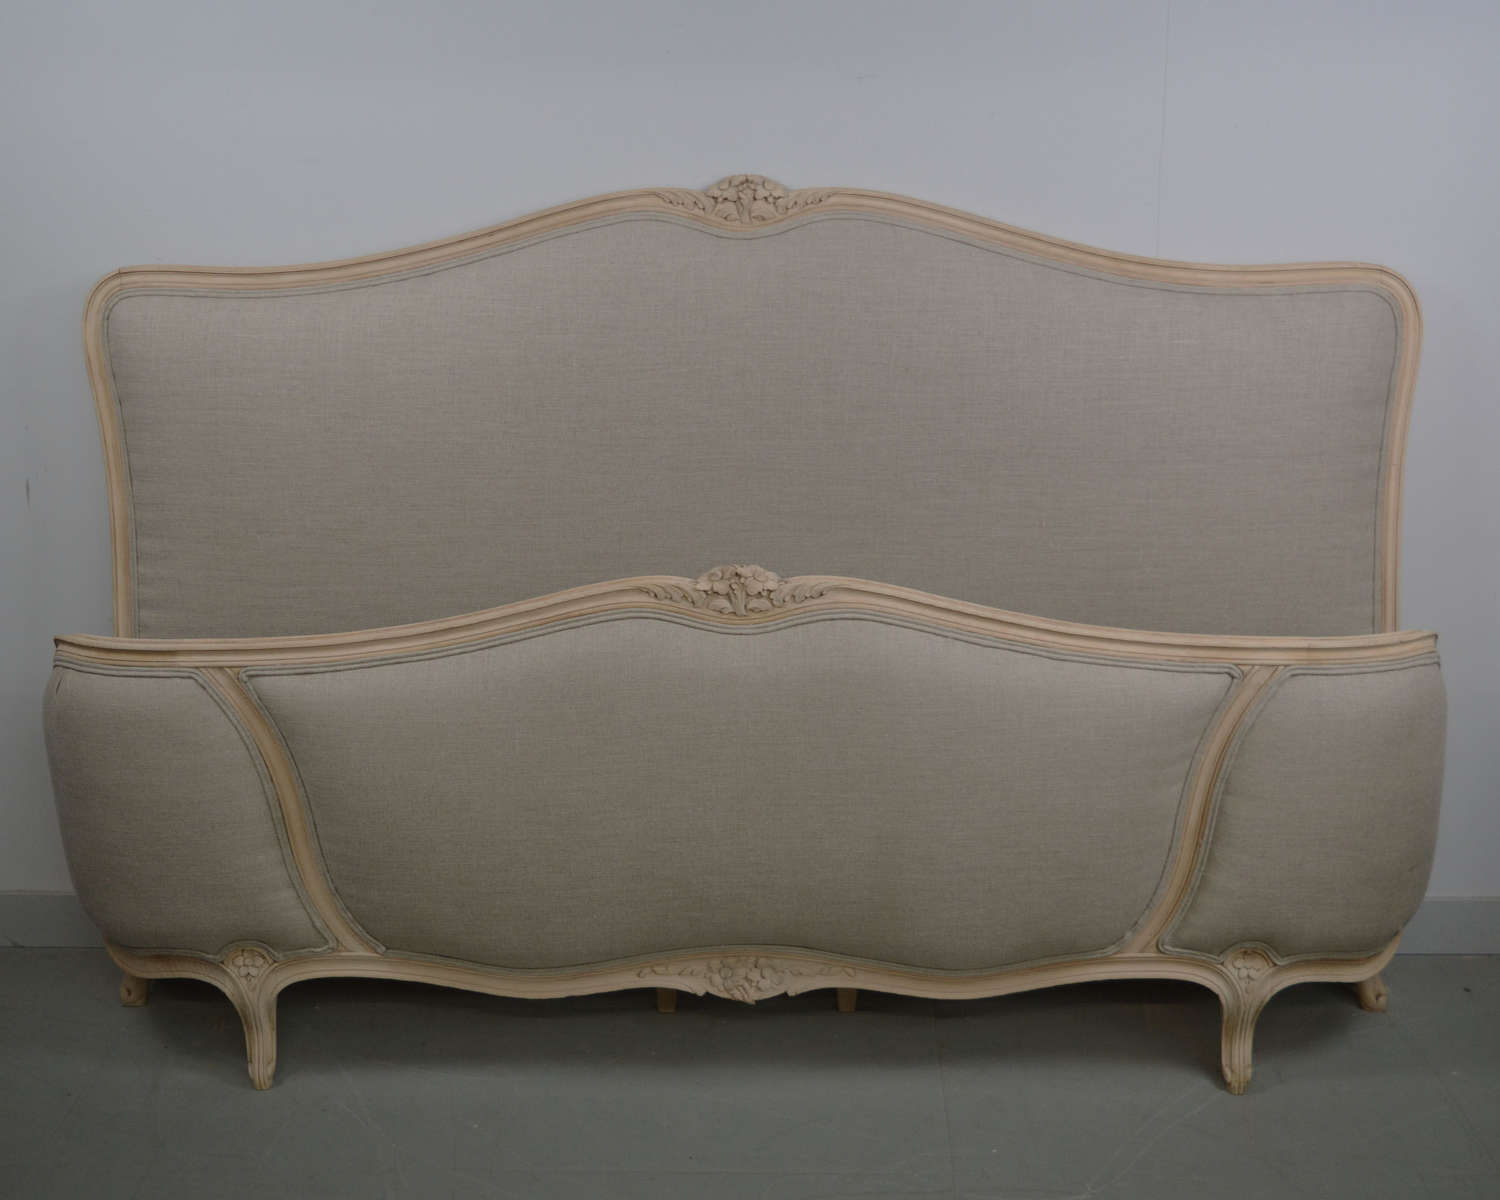 Super-king size Louis XV style bedstead